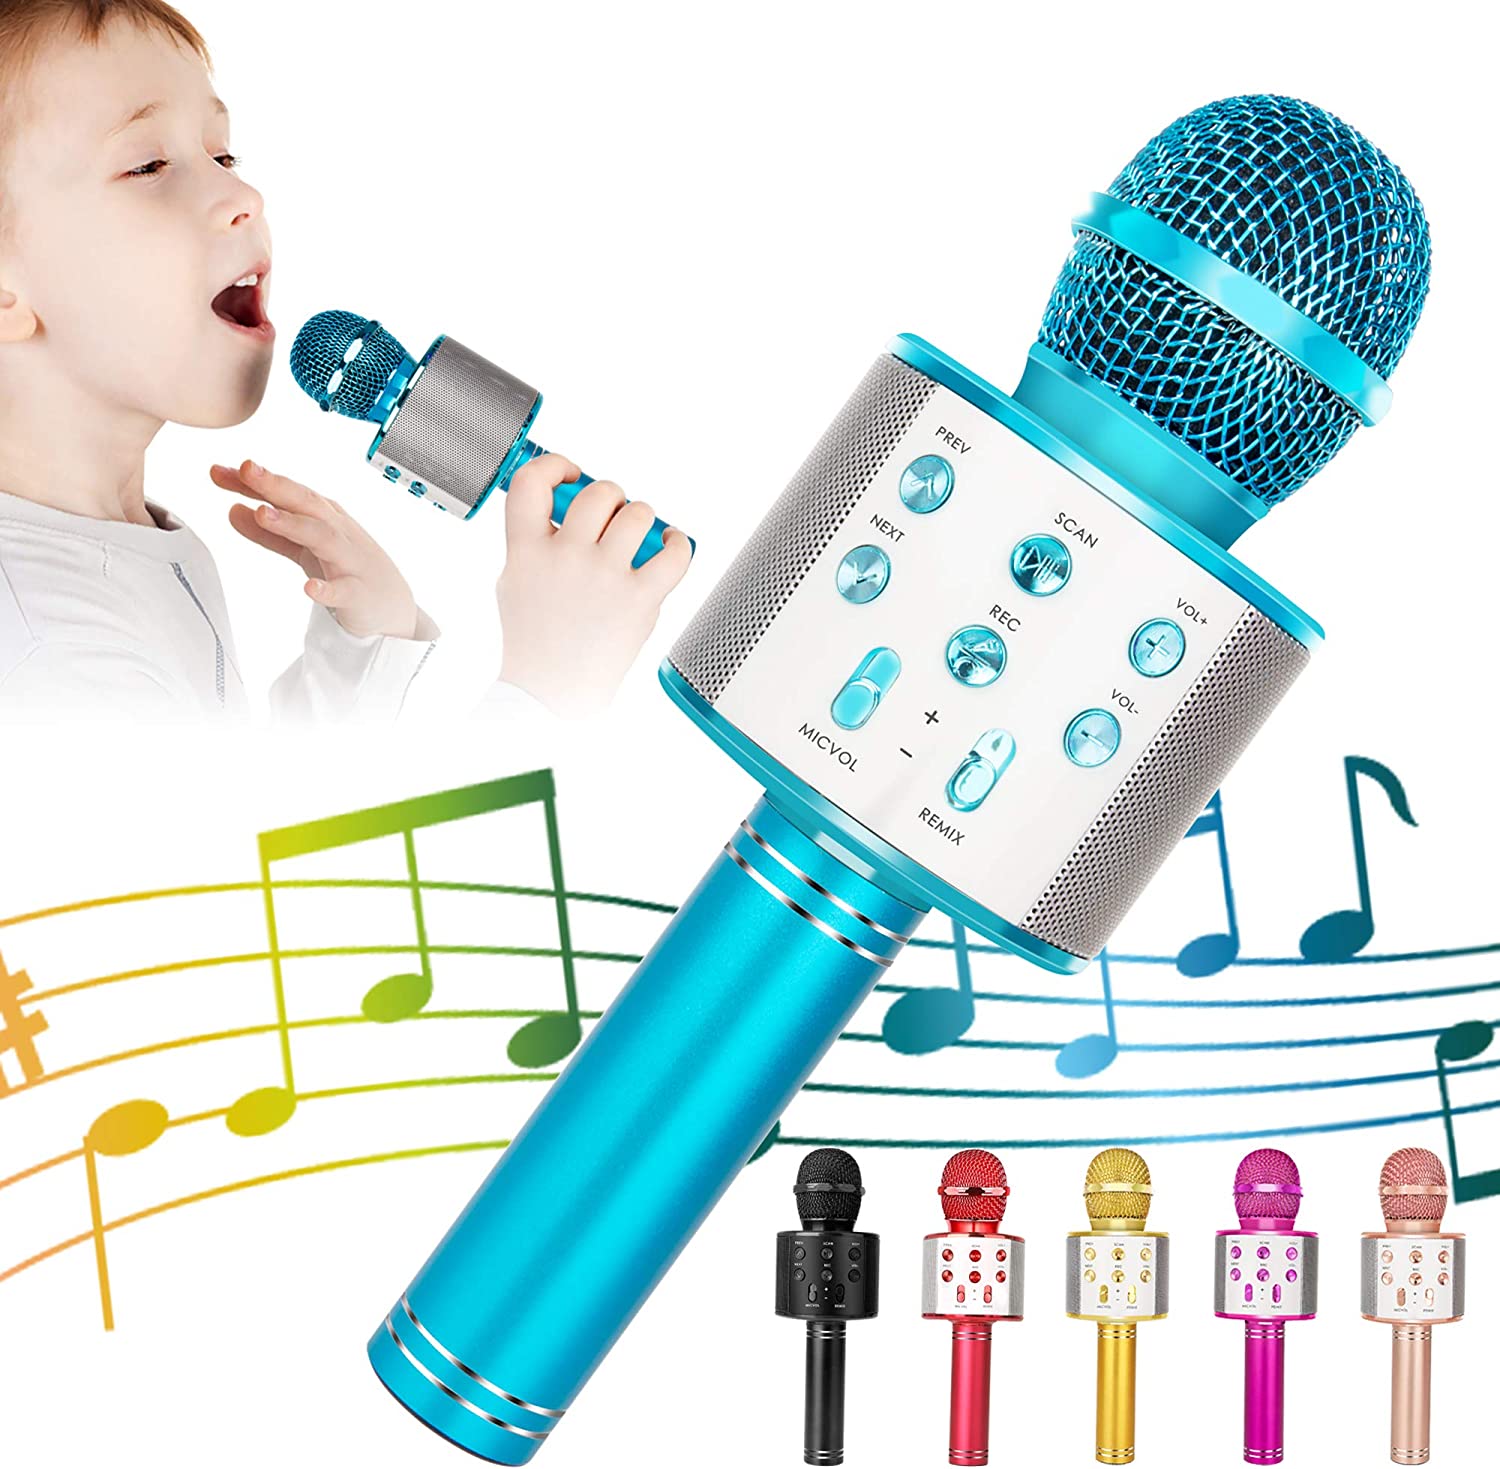 [💥Save 50% OFF - Mother's Day sale] Wireless Bluetooth 3-In-1 Karaoke Mic Speaker -BUY 2 GET 1 FREE & FREE SHIPPING